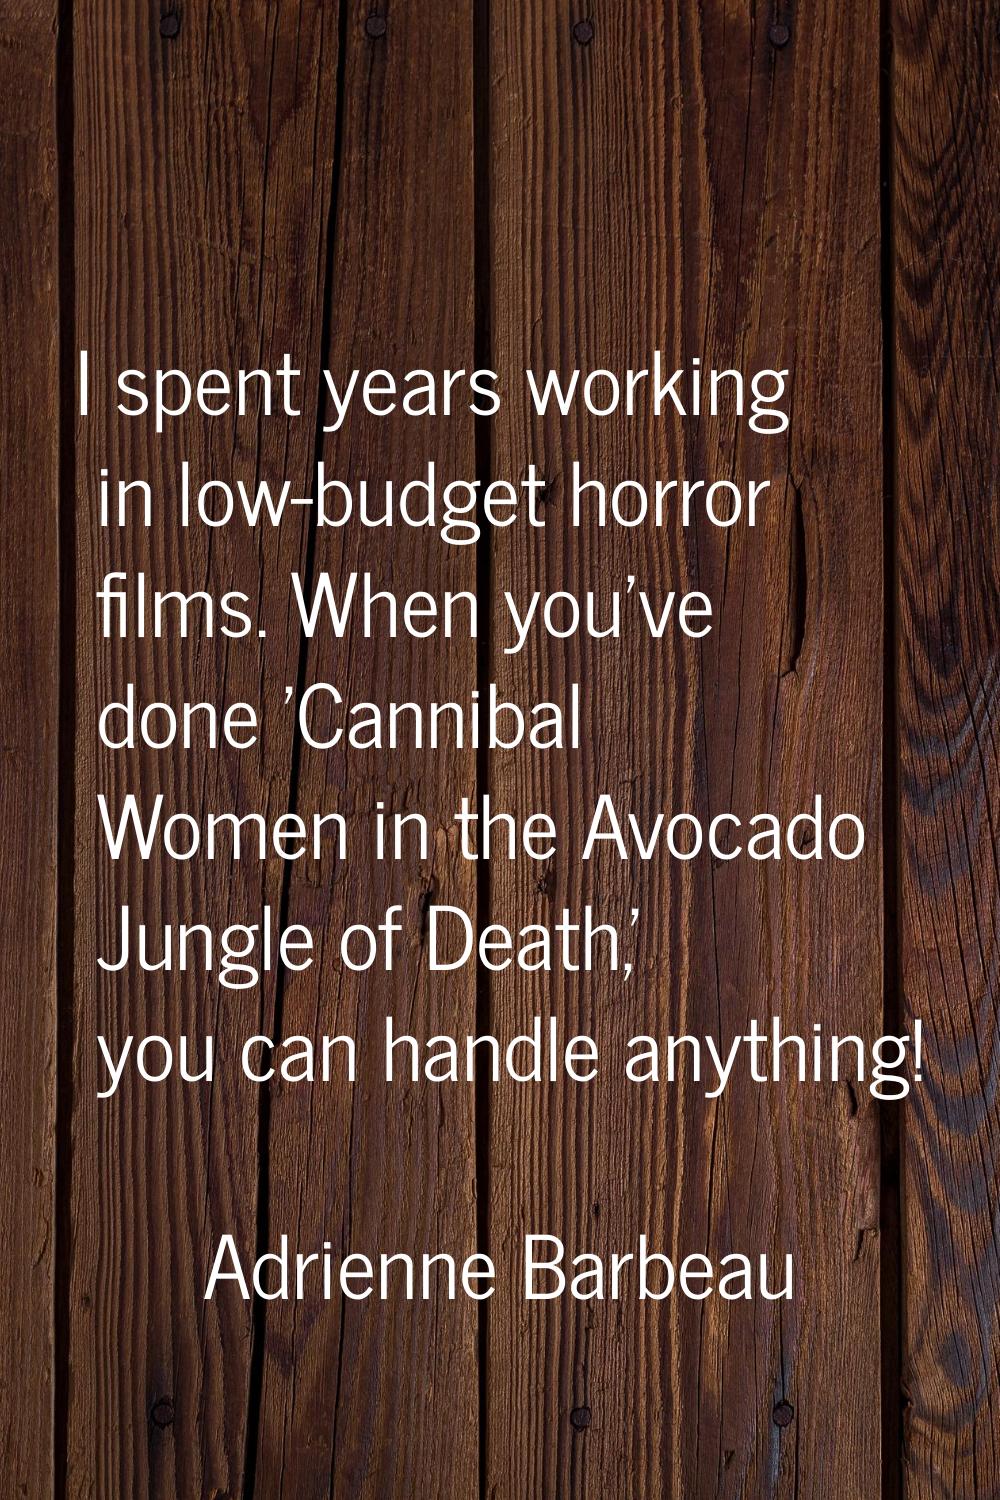 I spent years working in low-budget horror films. When you've done 'Cannibal Women in the Avocado J